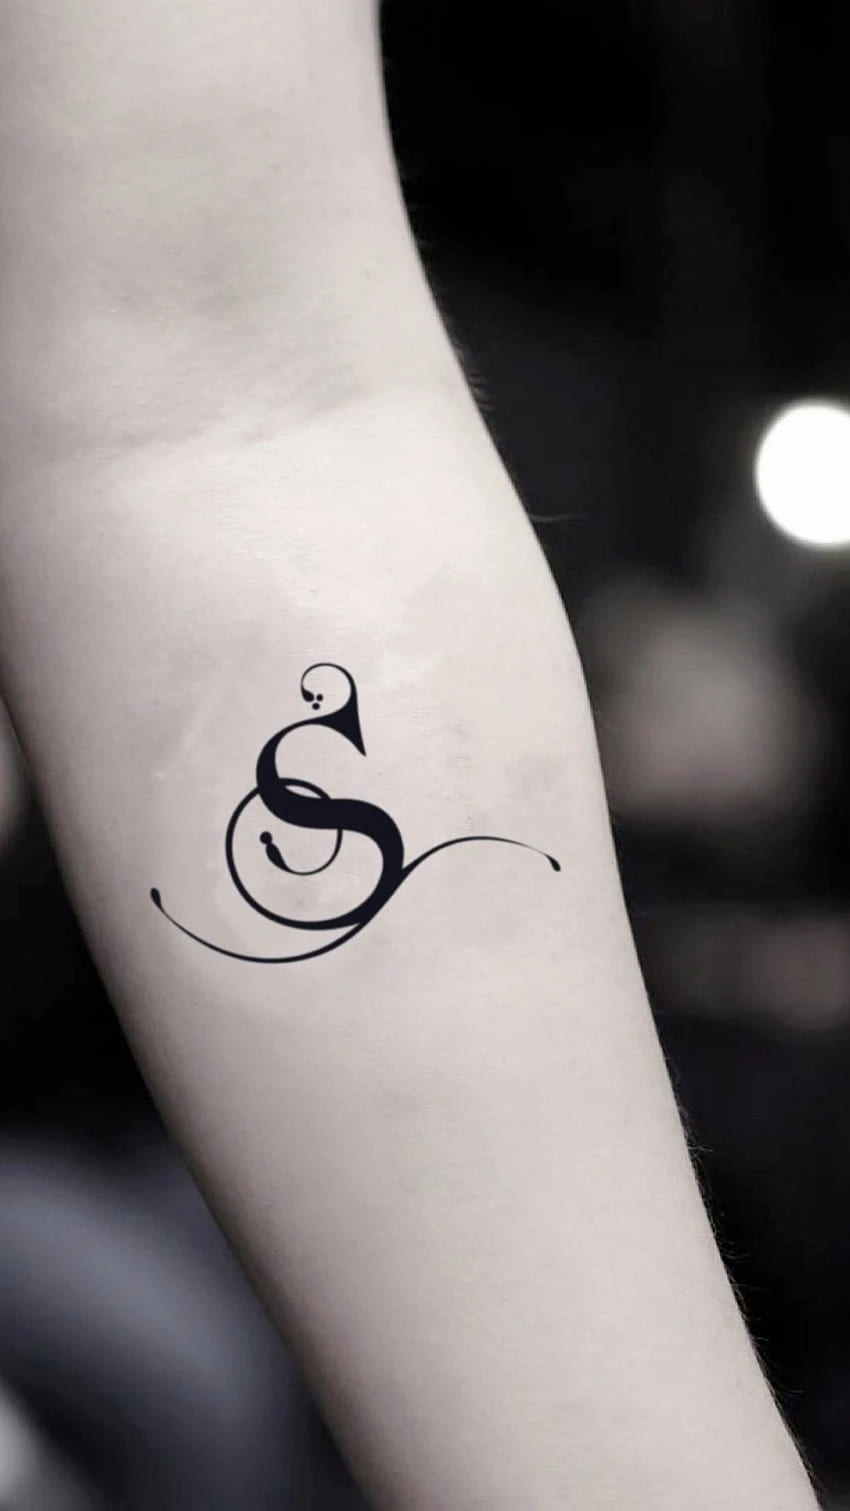 Letter R Tattoo ideas  amazing R letter tattoo design  R tattoo  collection  Video  Photo